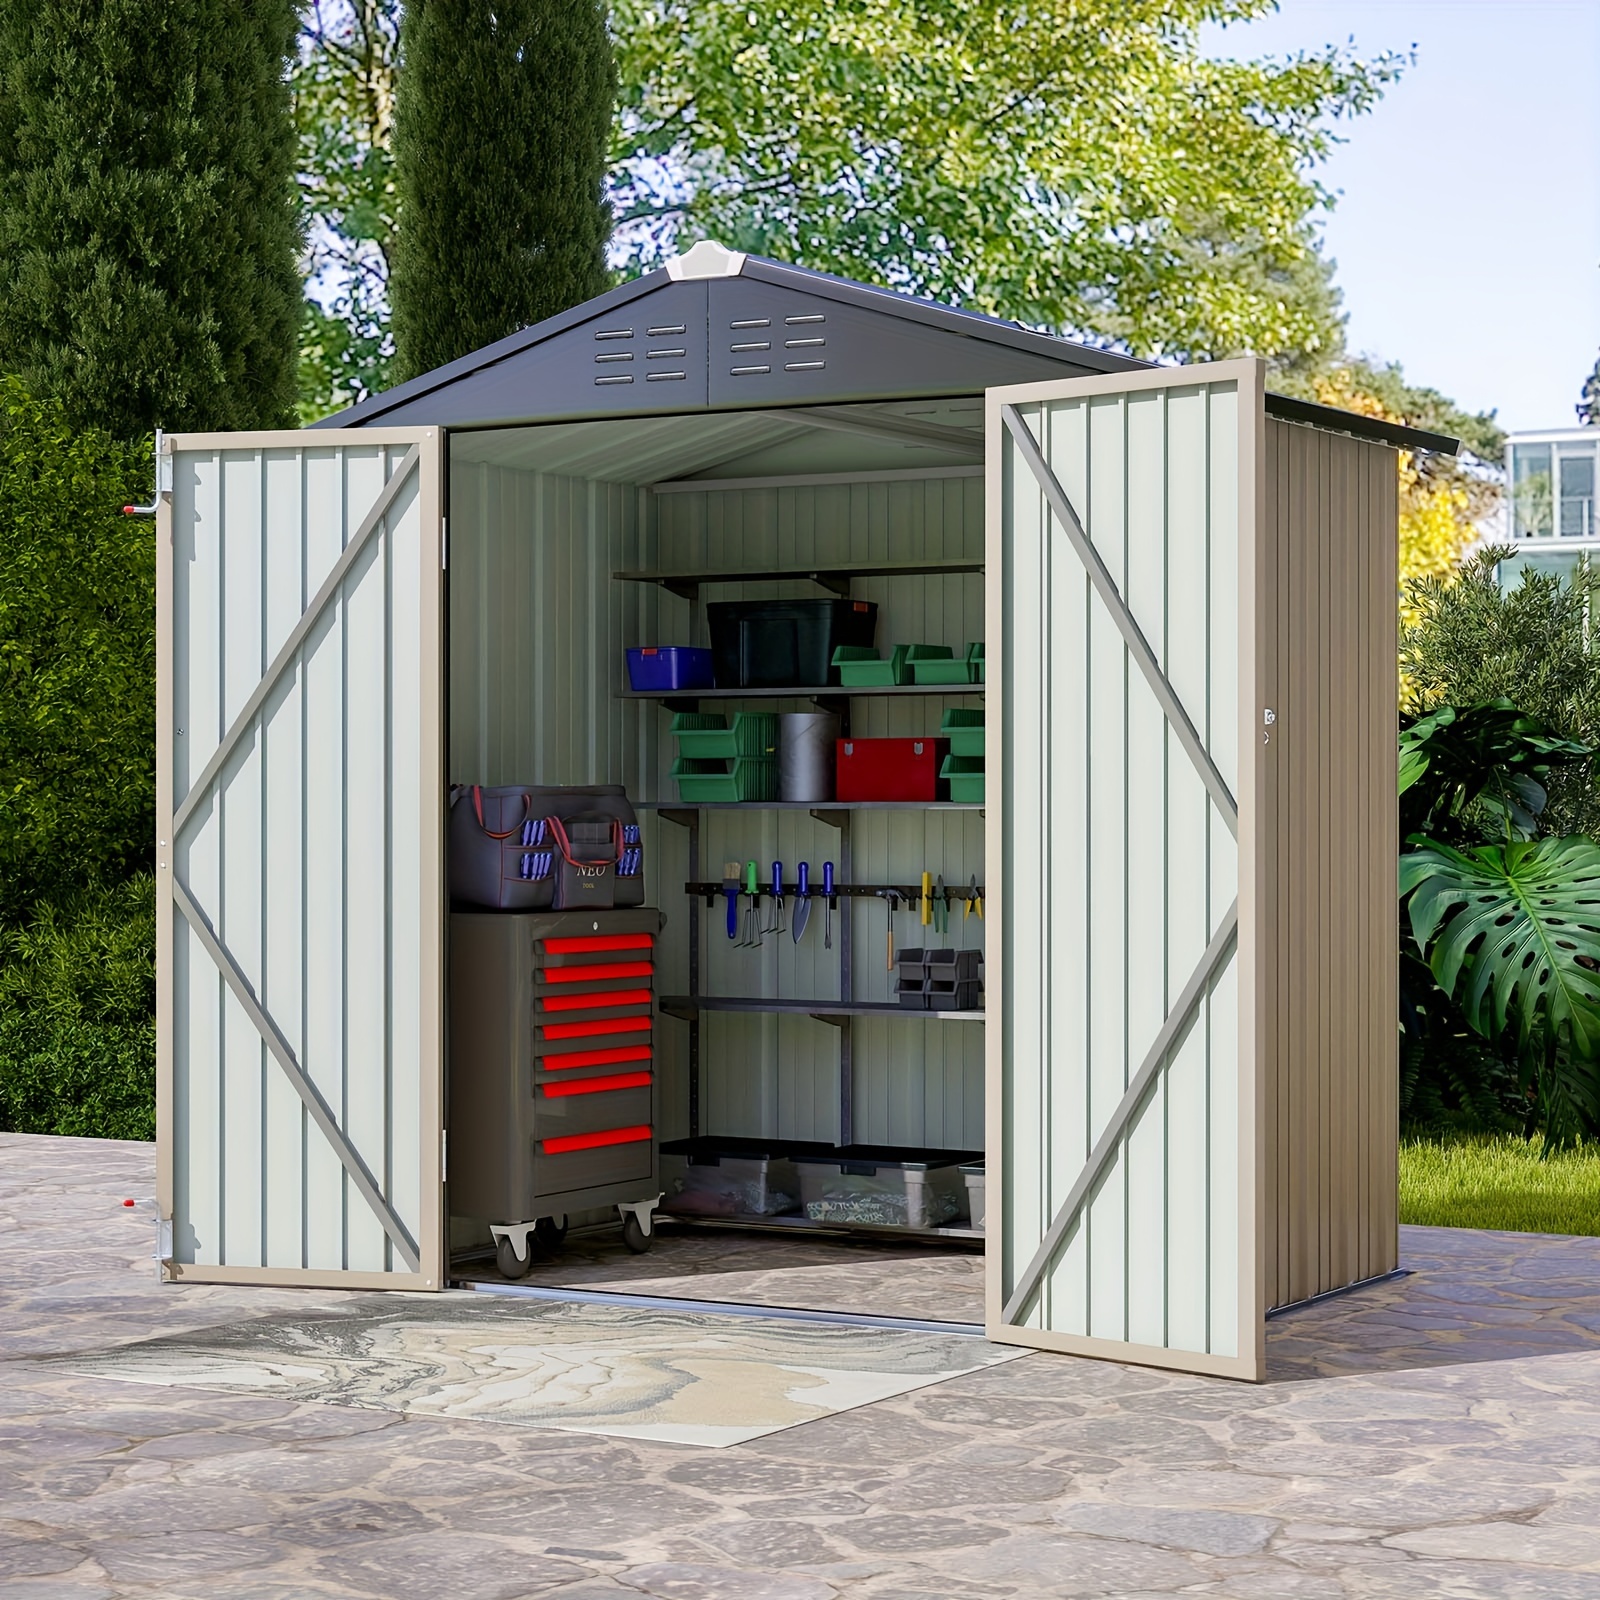 

6x4 Ft Outdoor Storage Shed, Metal Garden Tool Storage Shed With Sloping Roof And Double Lockable Door, Outdoor Shed For Garden Backyard Patio Lawn